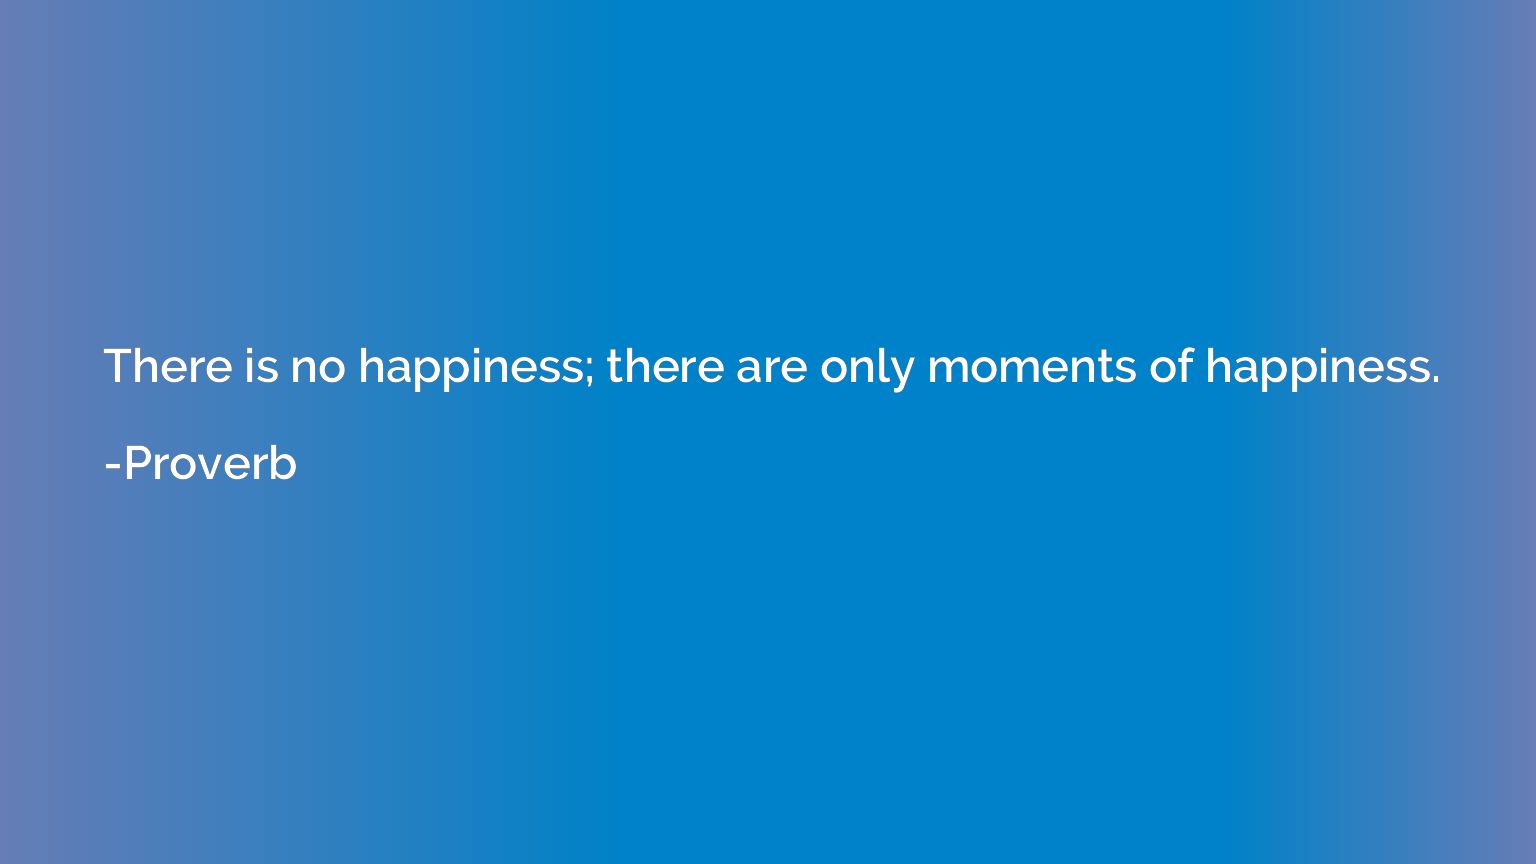 There is no happiness; there are only moments of happiness.